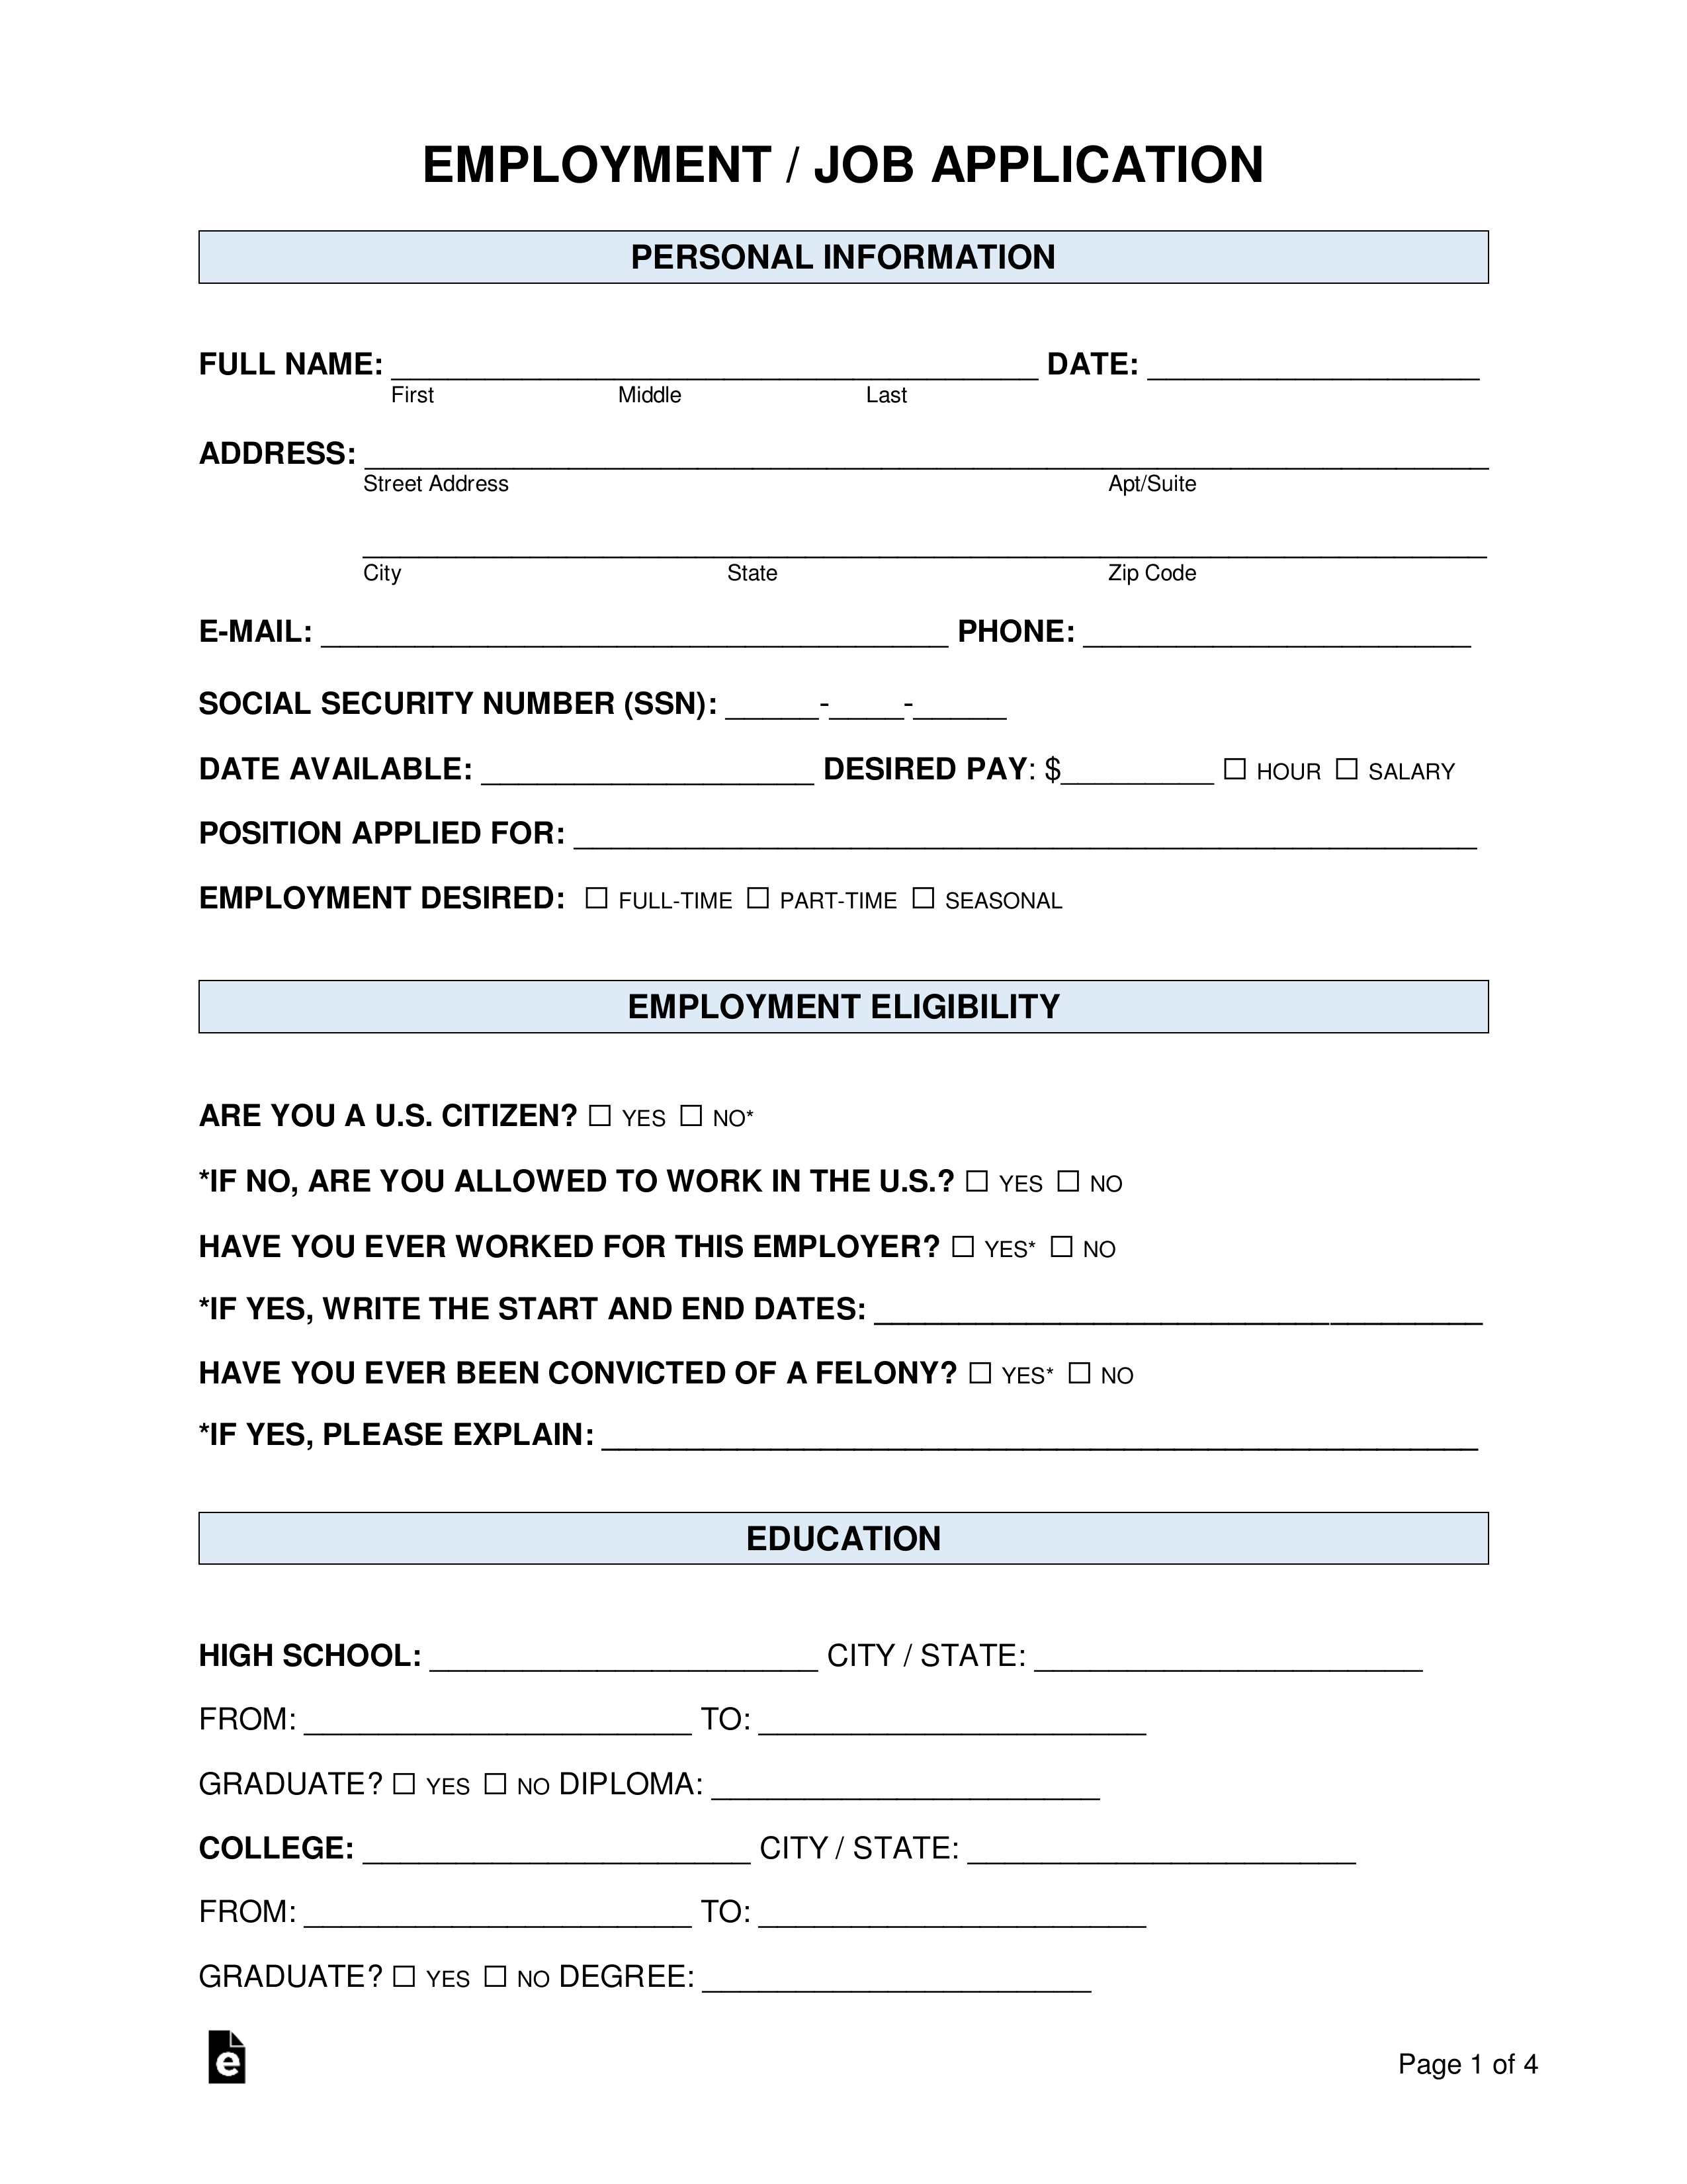 Free Job Application Form standard Template PDF Word EForms - Application For Employment Form Free Printable